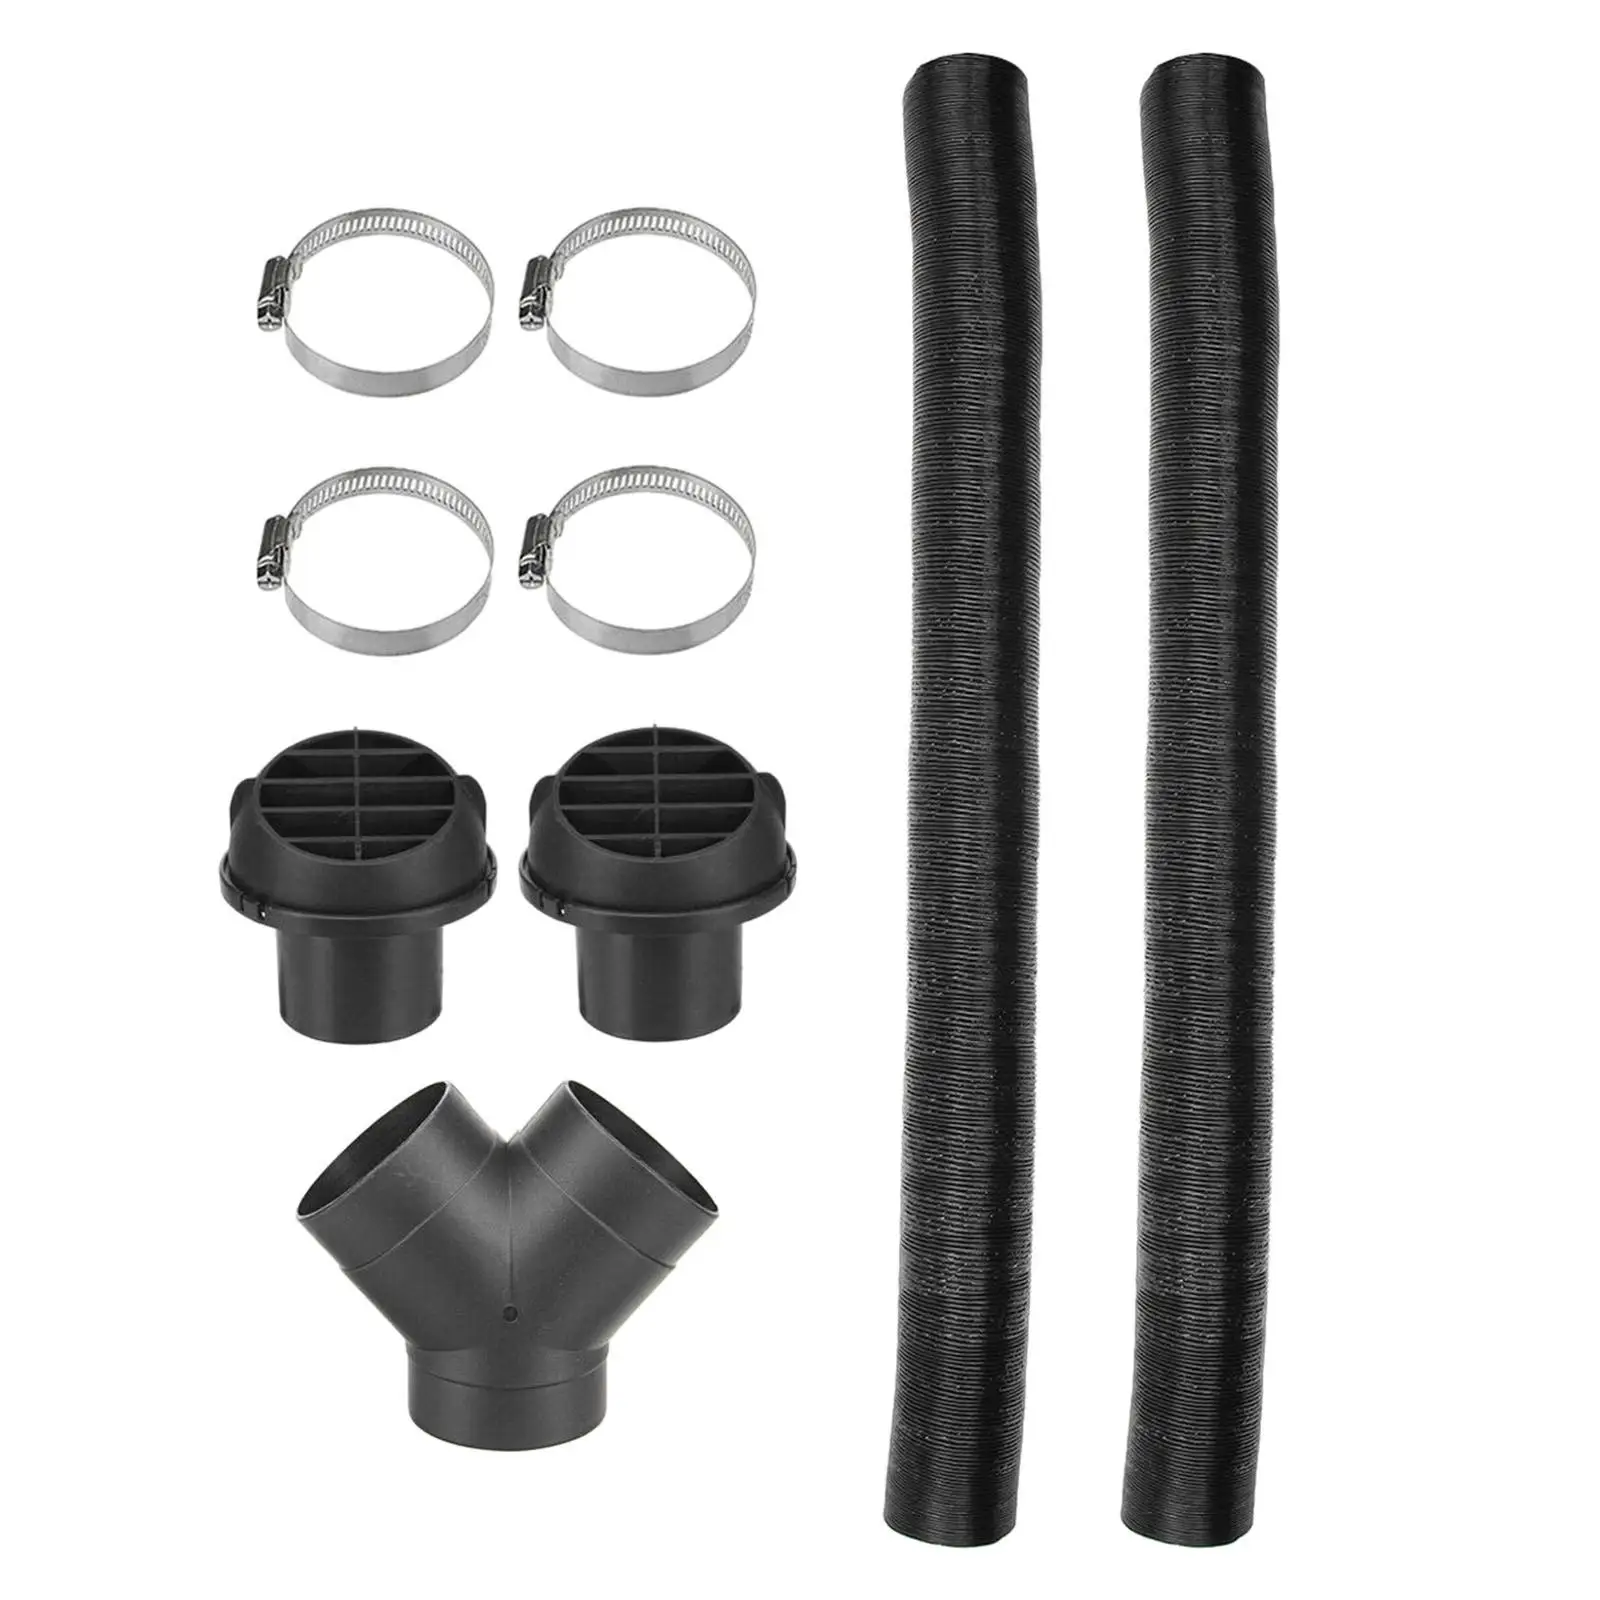 75mm Heater Pipe Duct + Warm Air Outlet For Webasto for Eberspacher For Heater Vent Hose Clips Set